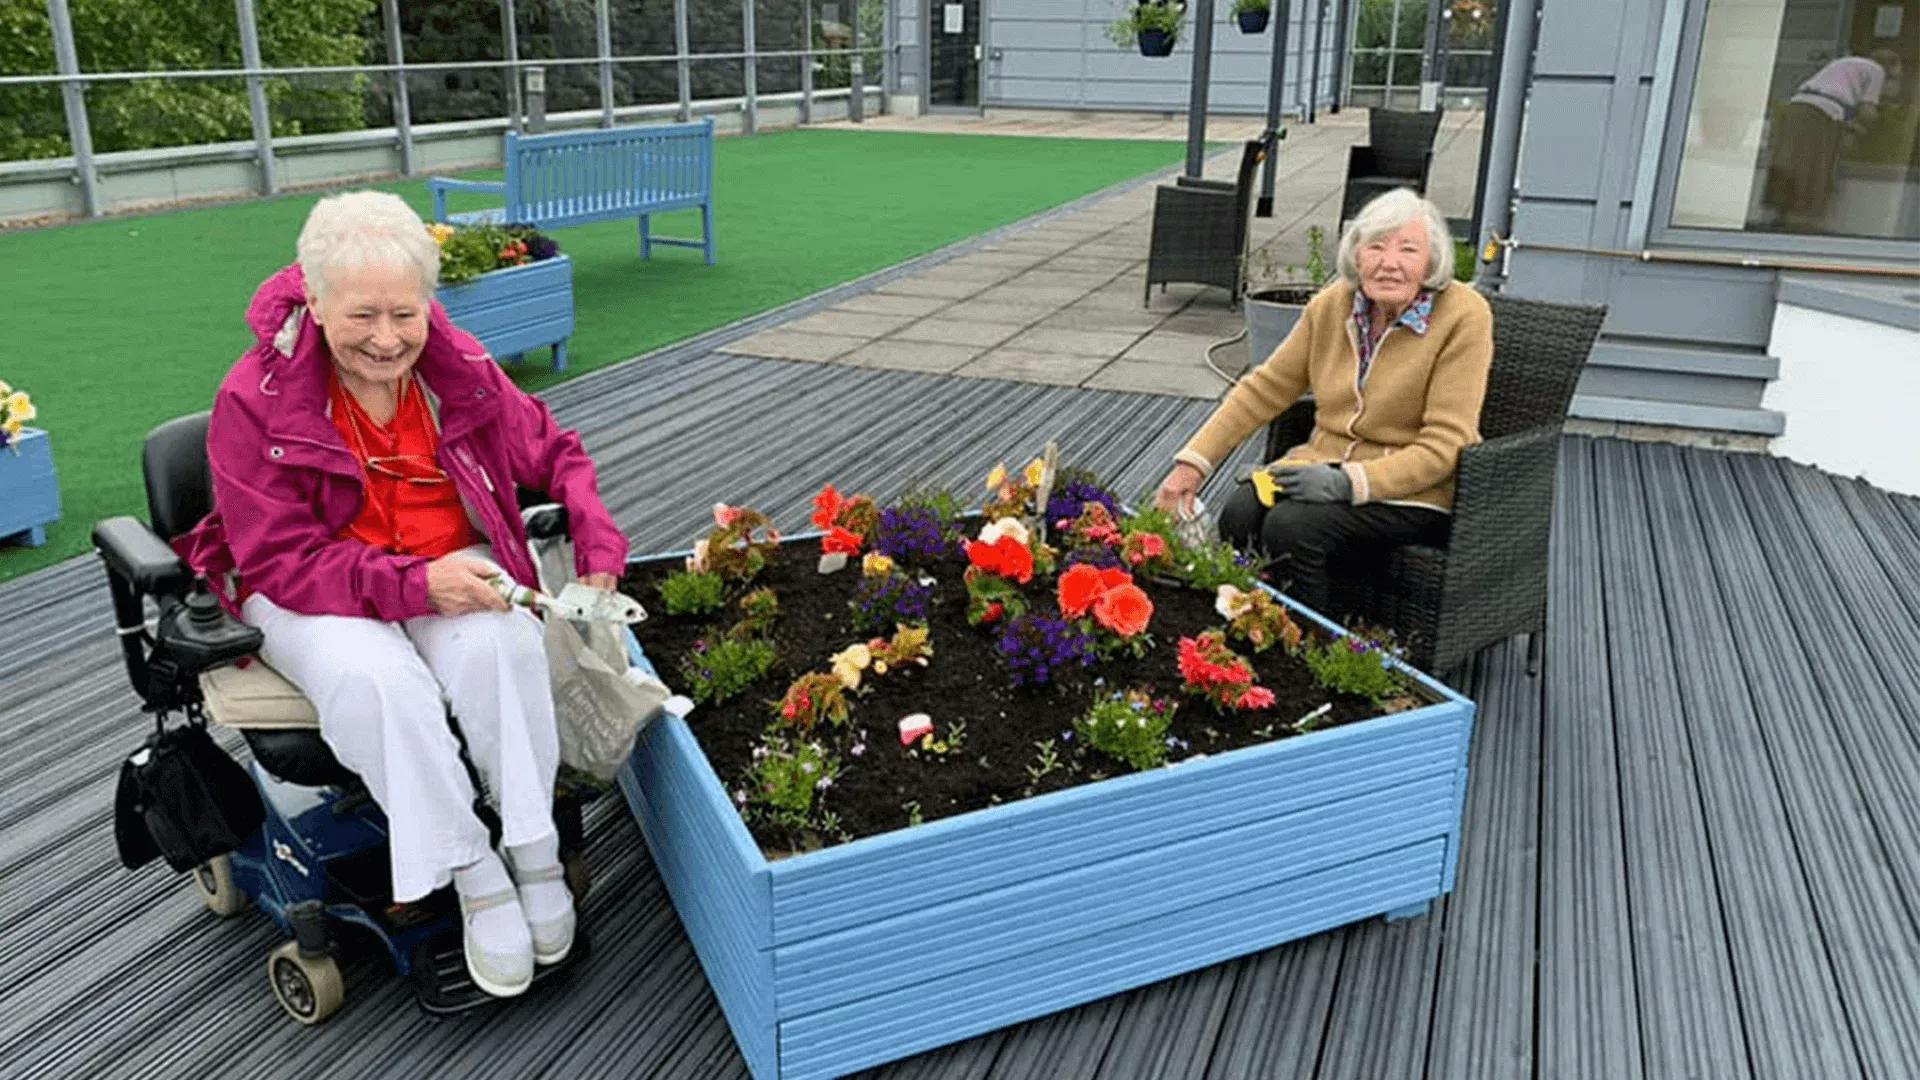 Residents on the decking at Hawthorns Aldridge Care Home in Walsall, Staffordshire